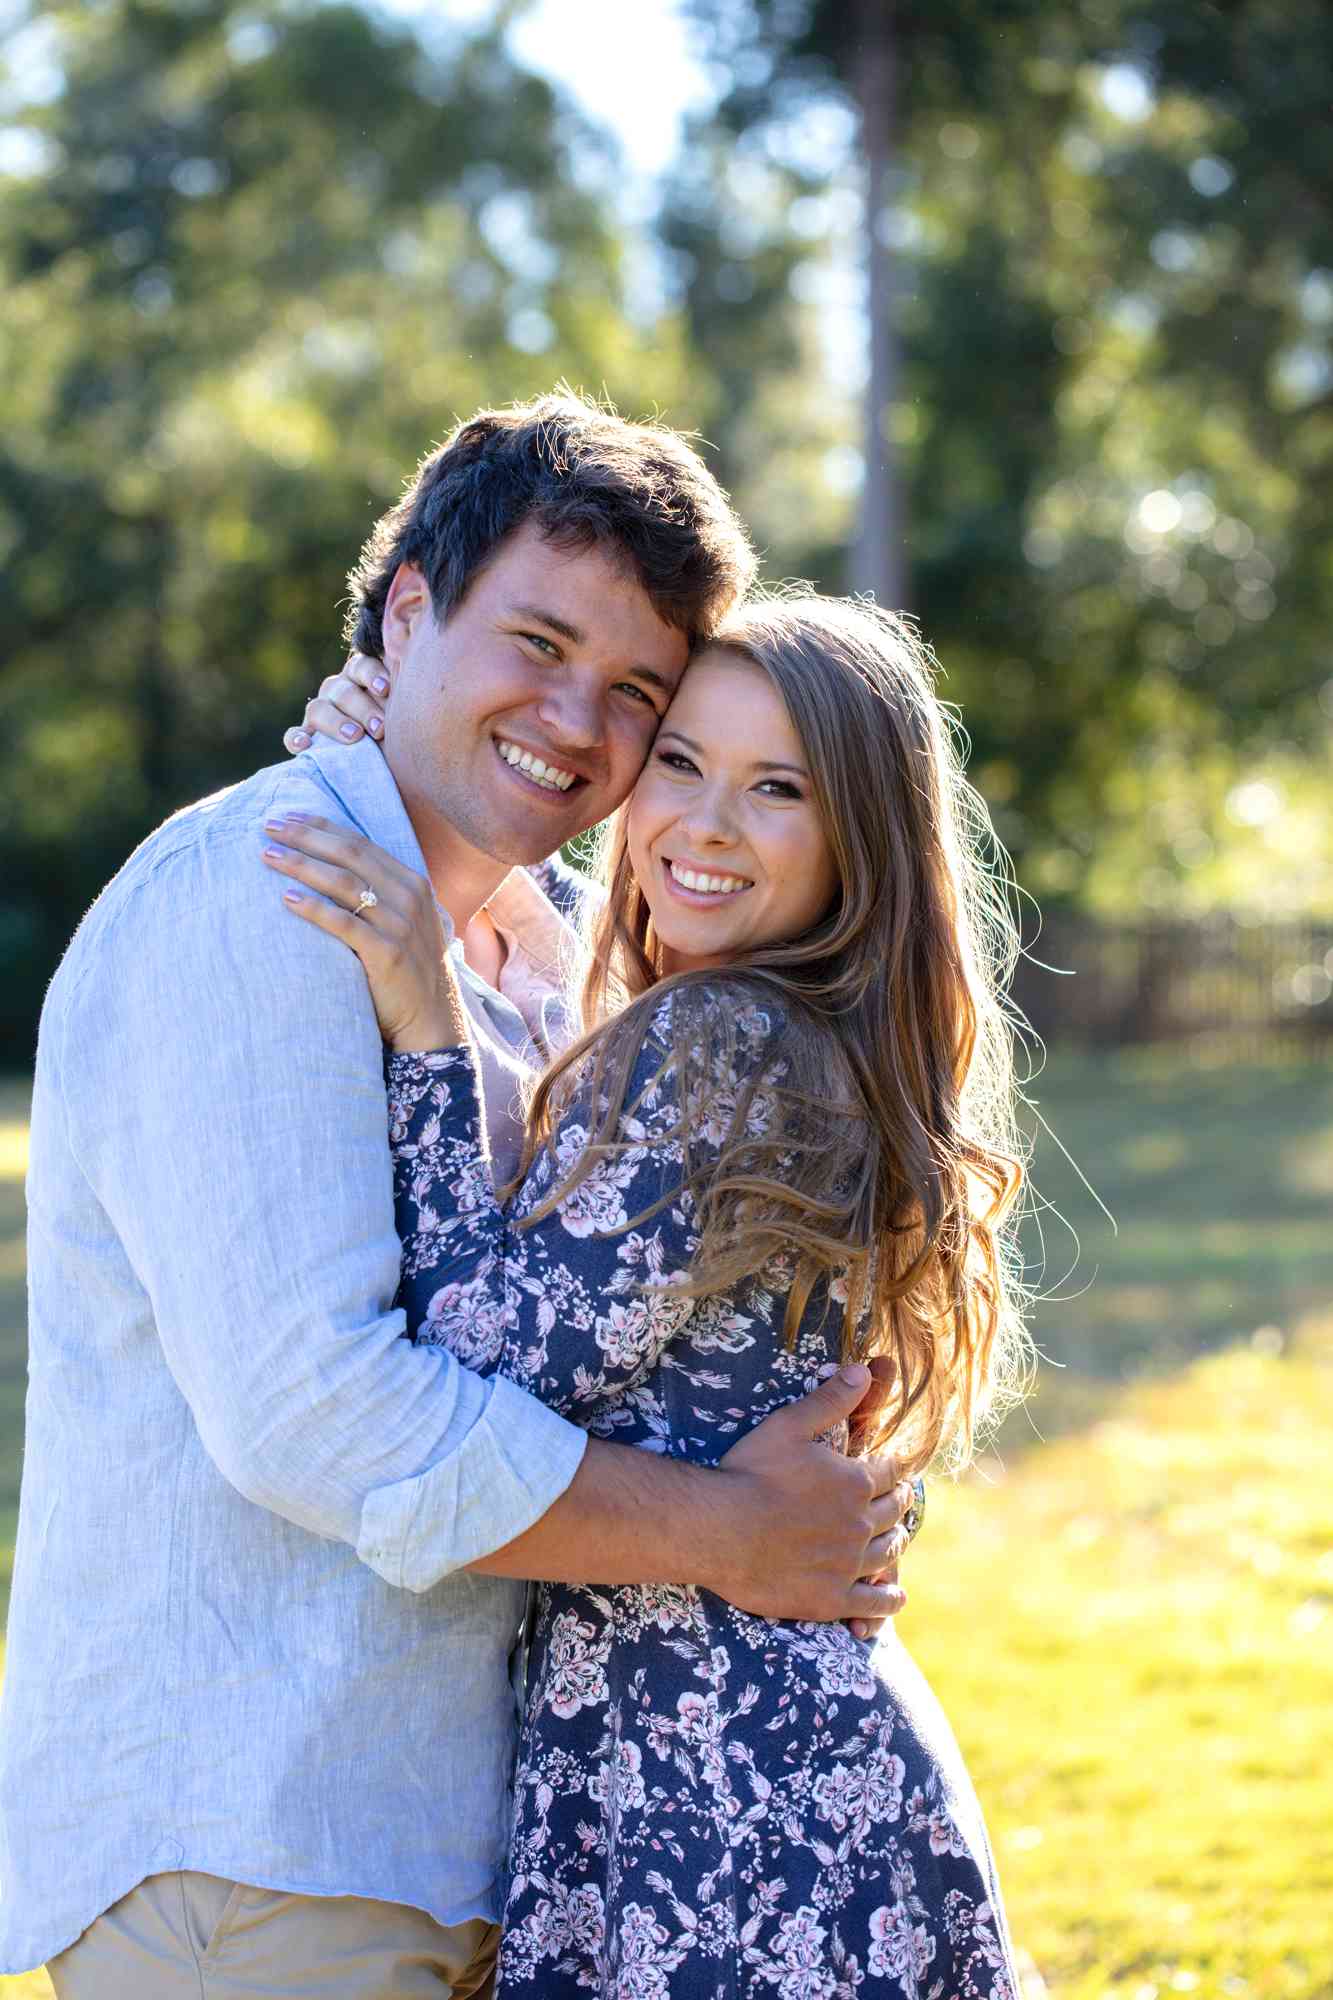 Bindi Irwin Marries Chandler Powell at Australia Zoo: 'Today We Celebrated Life' Image?url=https%3A%2F%2Fstatic.onecms.io%2Fwp-content%2Fuploads%2Fsites%2F20%2F2019%2F07%2Firwin-powell-8-2000a